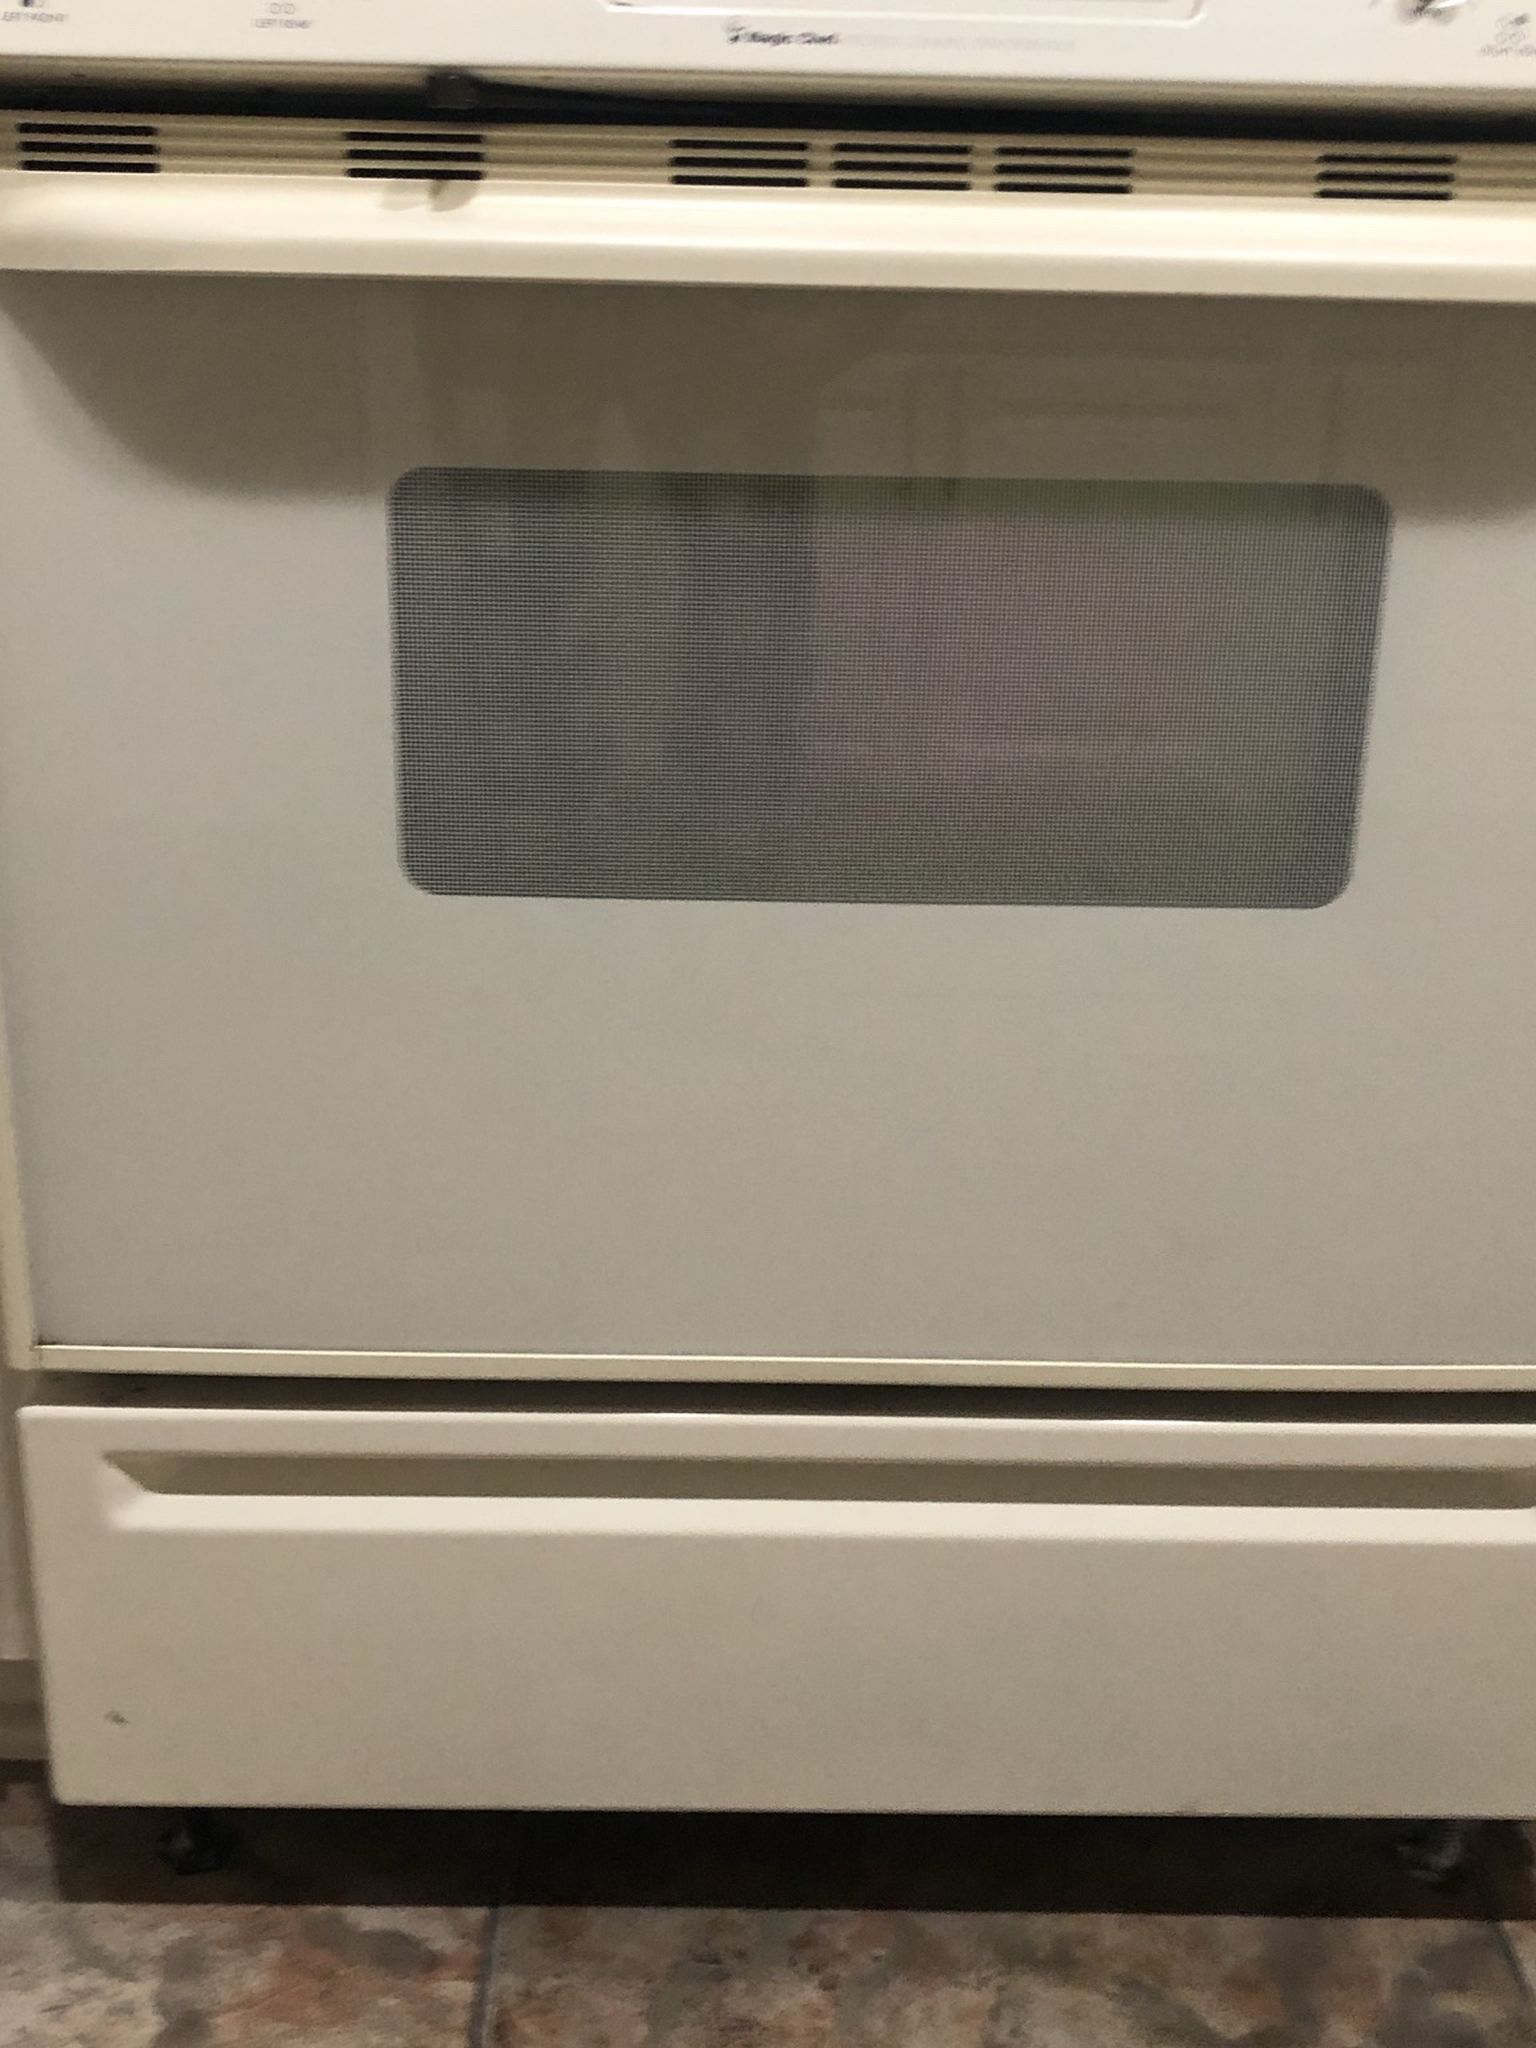 Free !!!!Oven And Dishwasher